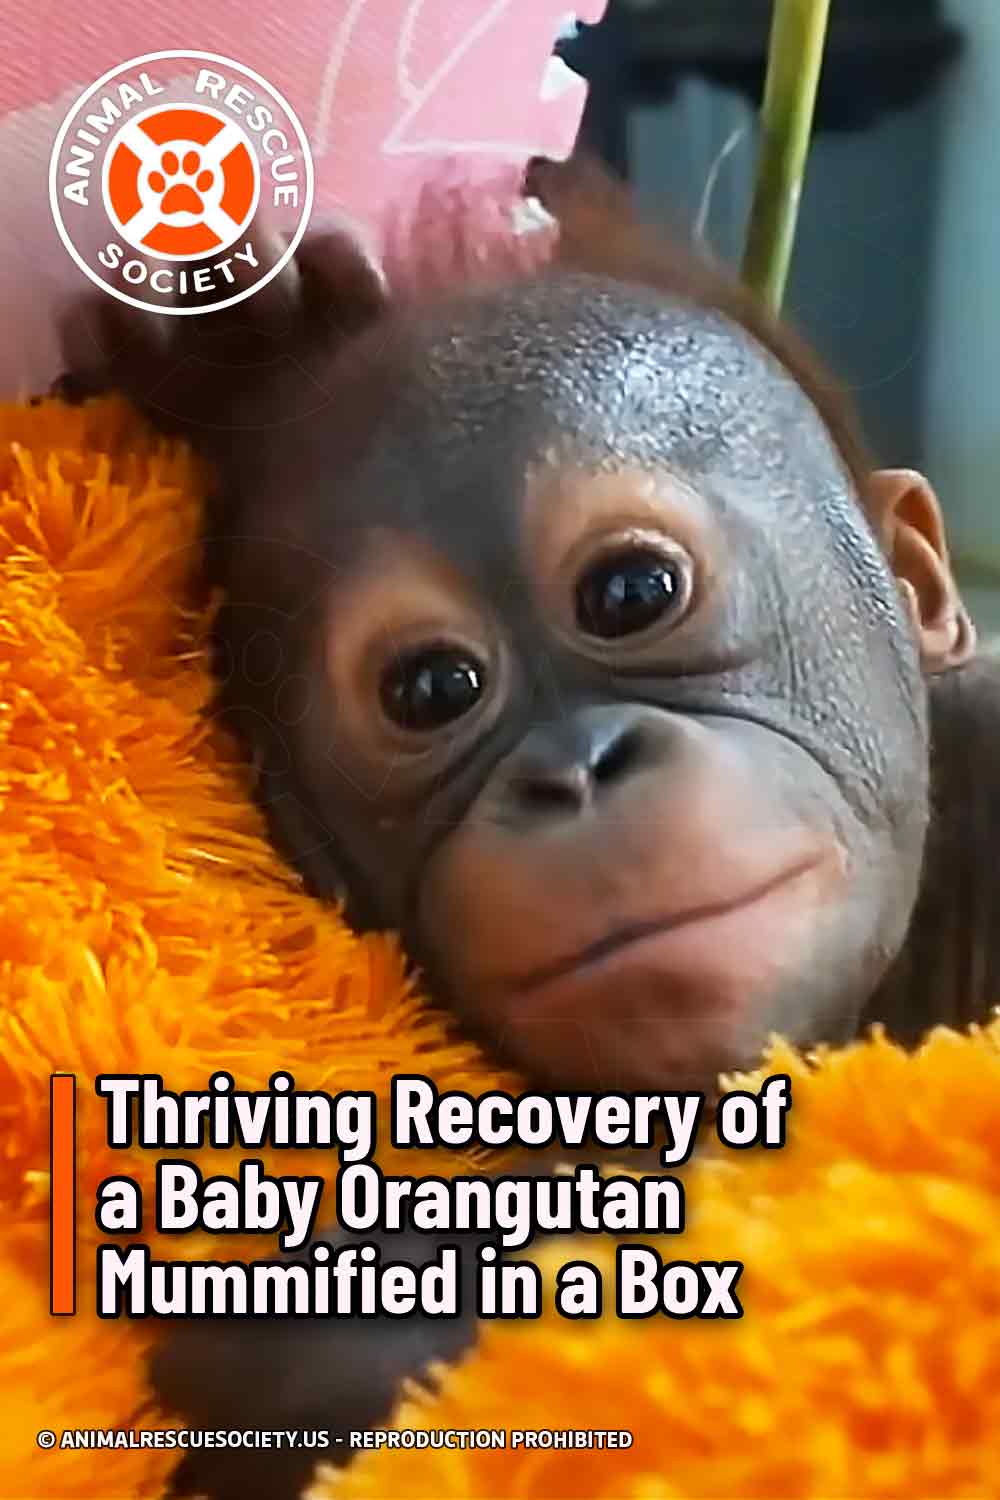 Thriving Recovery of a Baby Orangutan Mummified in a Box